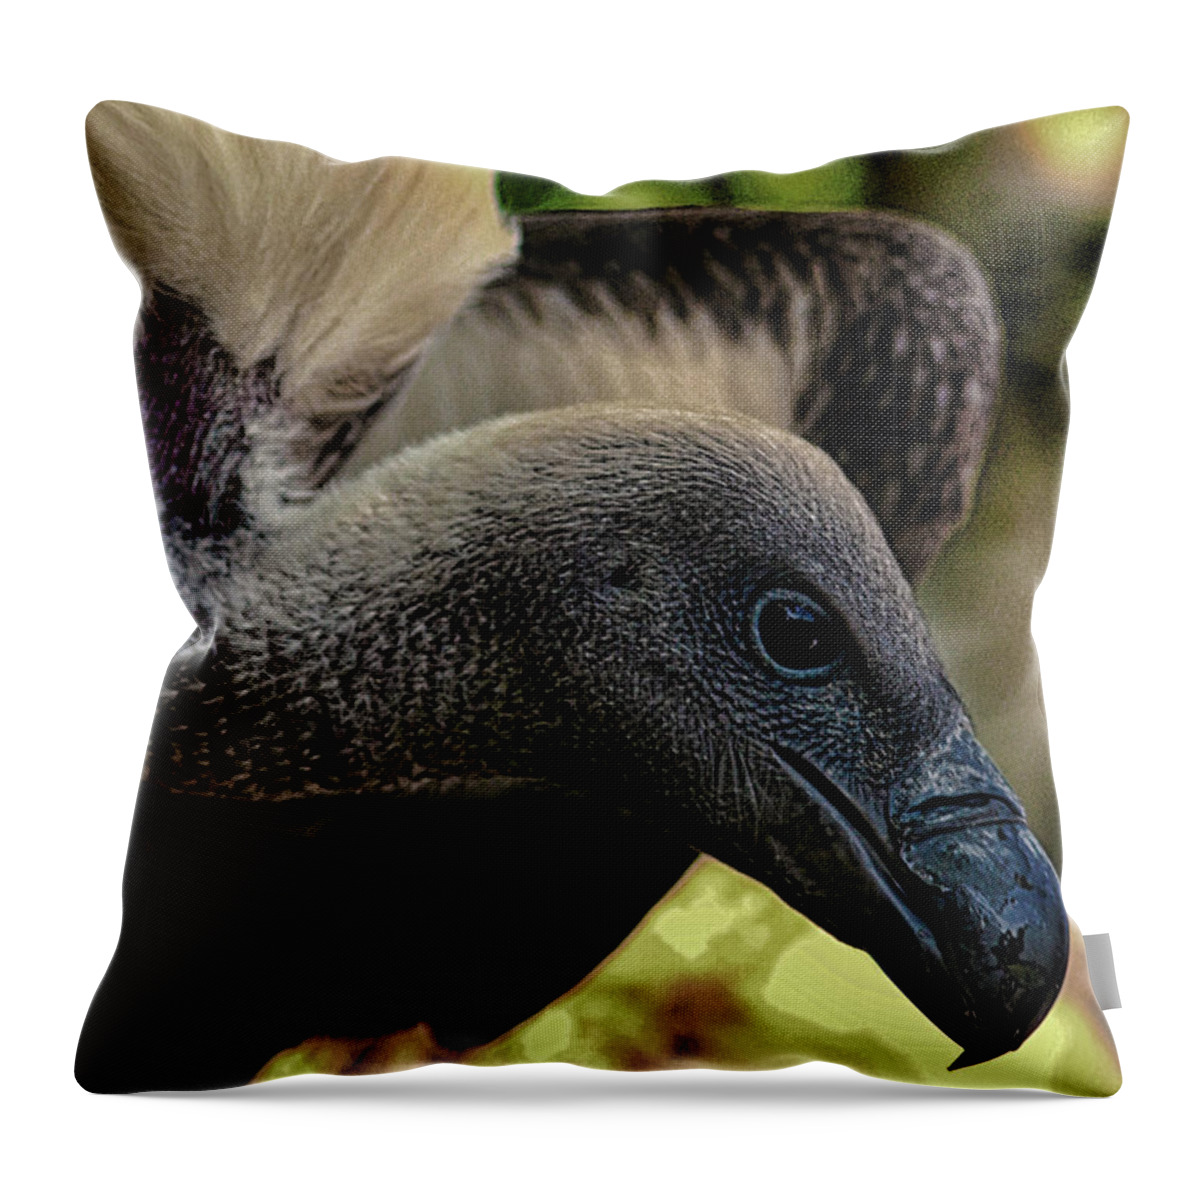 Vulture Throw Pillow featuring the photograph Vulture by Martin Newman